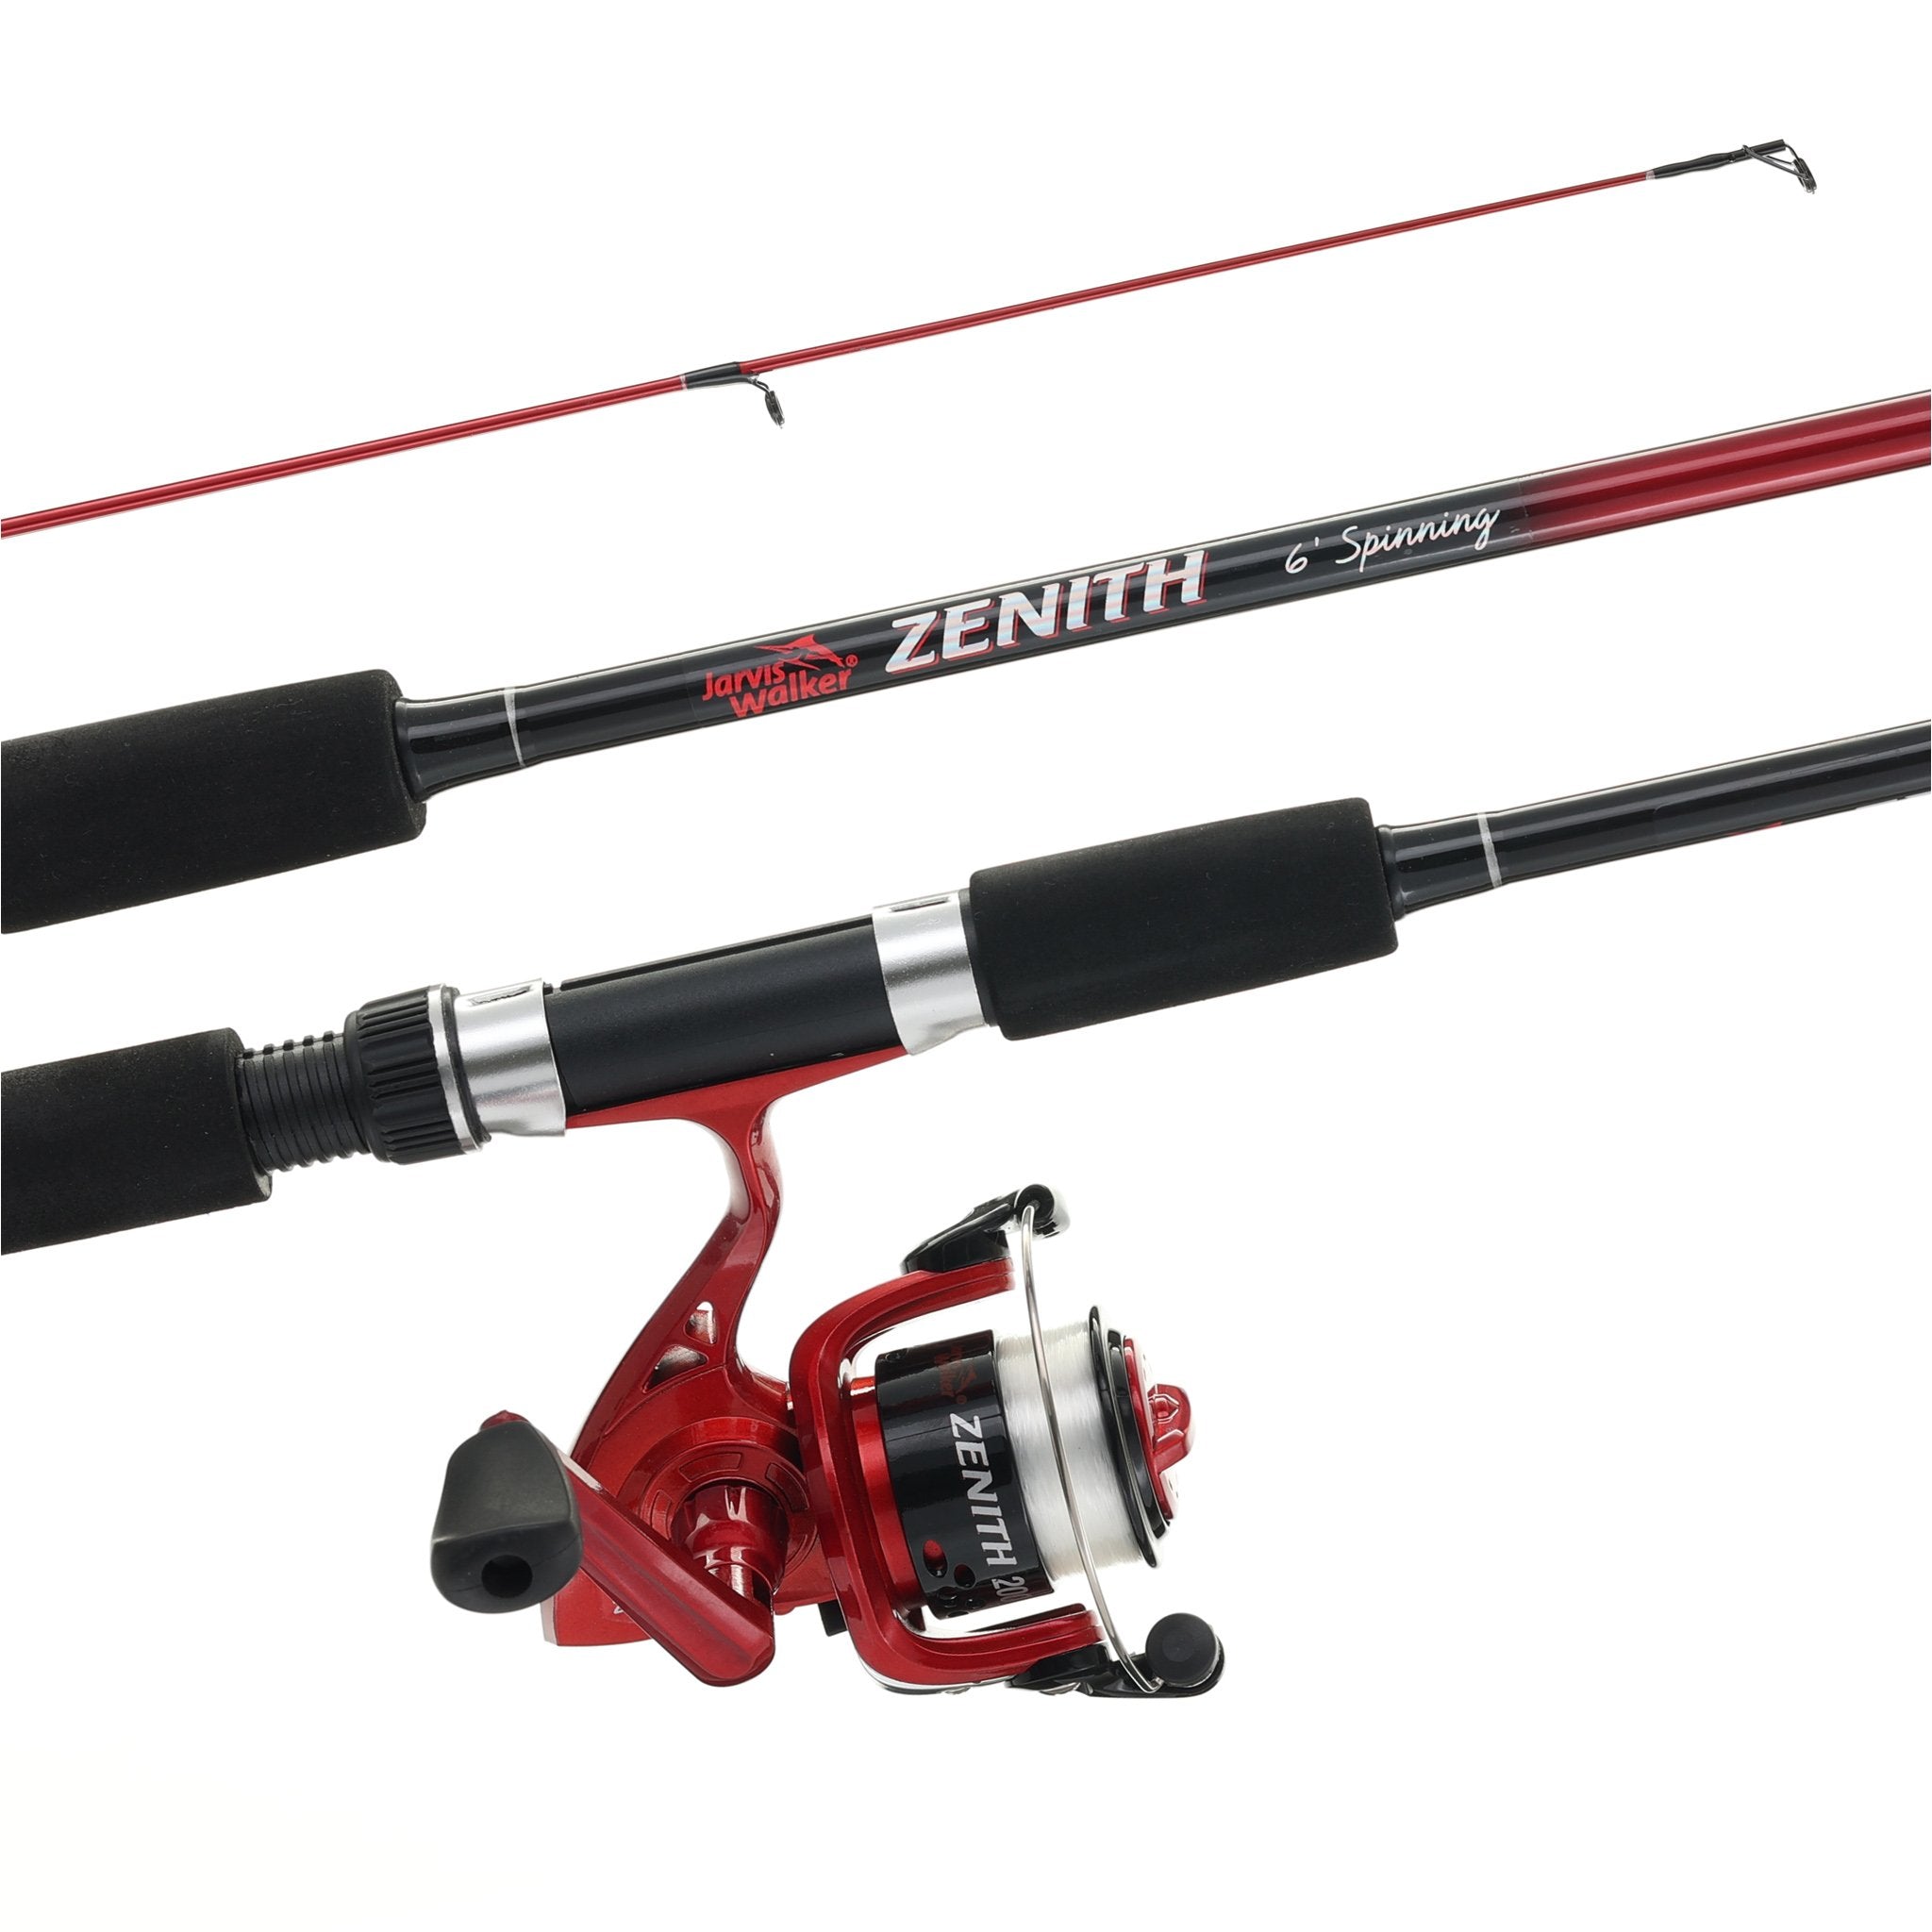 Help me put an age on this quantum. - Fishing Rods, Reels, Line